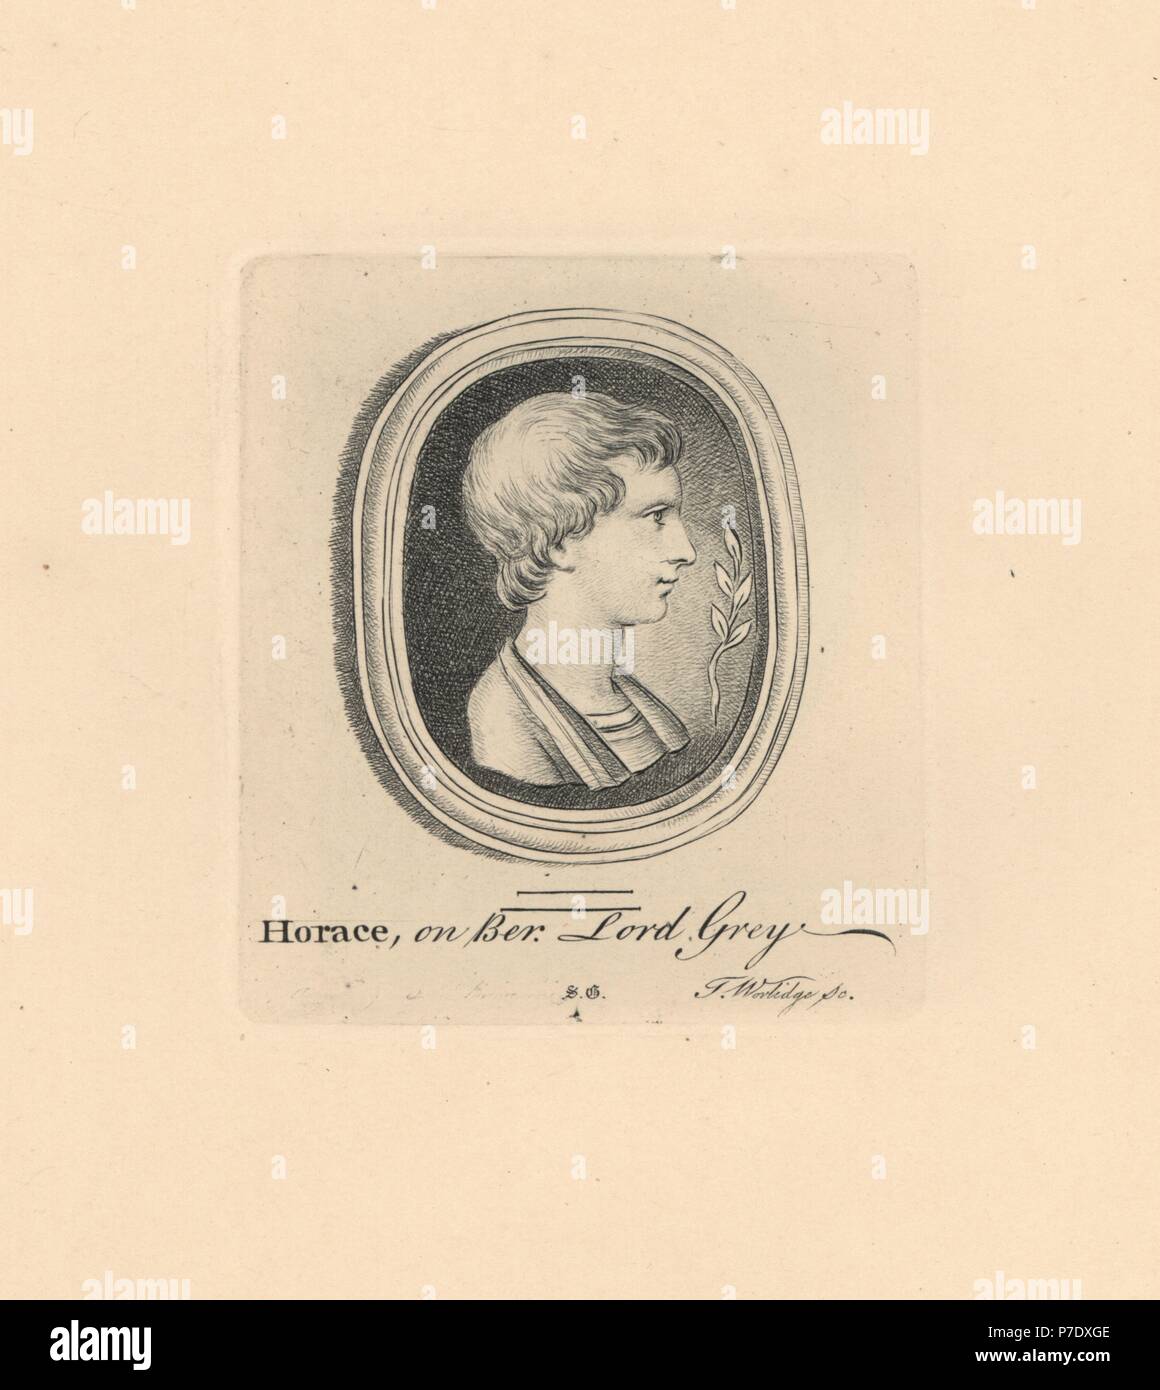 Portrait of Horace, Roman poet, on beryl from Lord Grey's collection. Copperplate engraving by Thomas Worlidge from James Vallentin's One Hundred and Eight Engravings from Antique Gems, 1863. Stock Photo